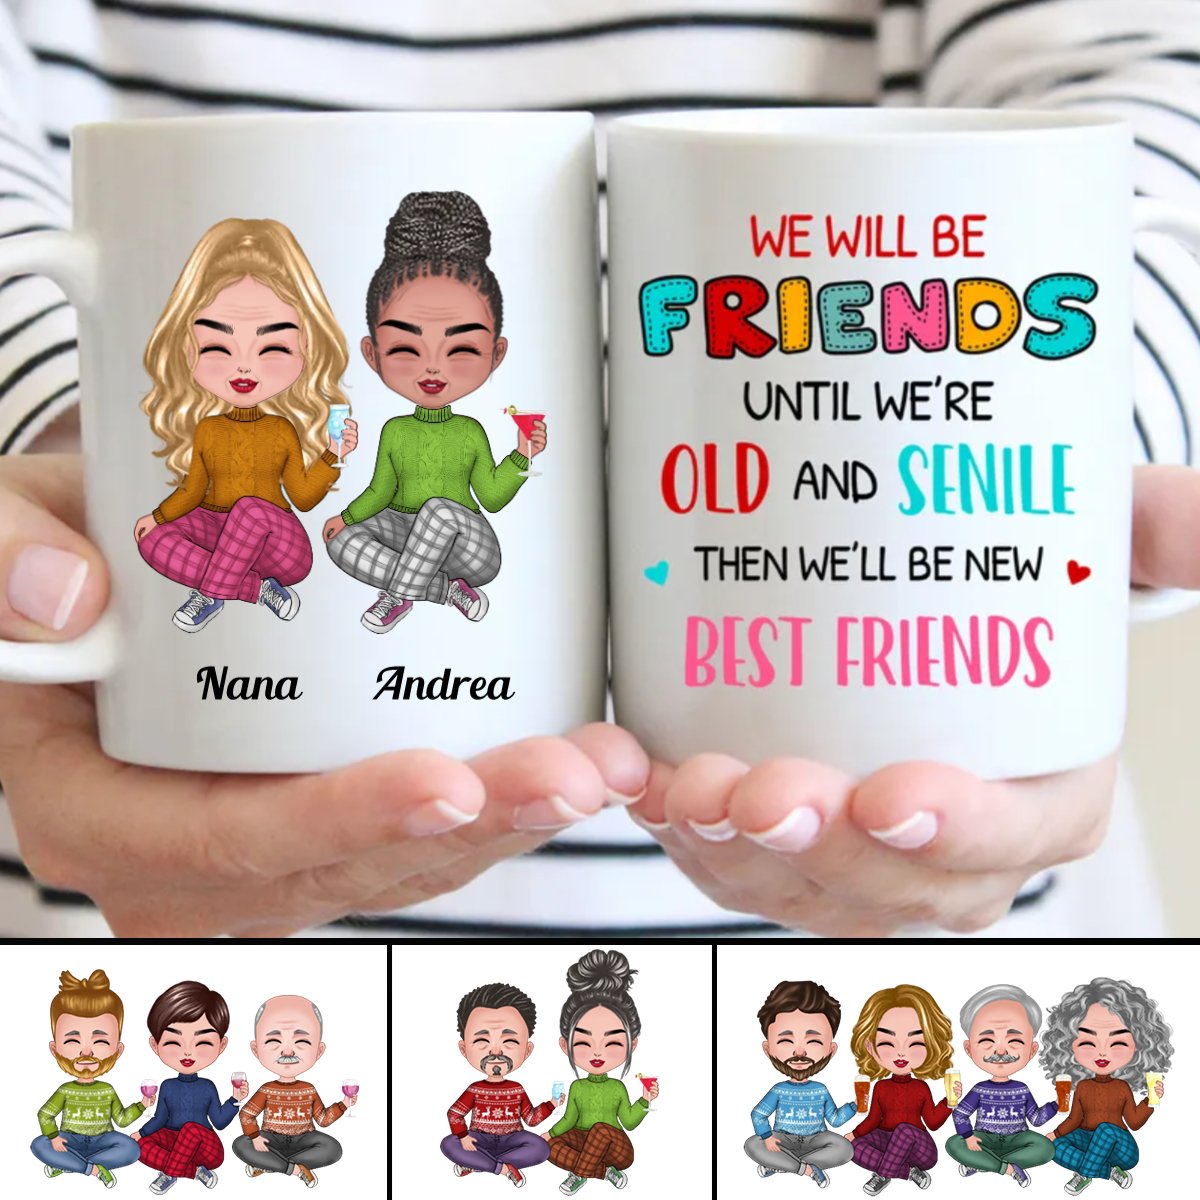 We Will Be Friends Until We're Old And Senile, Then We'll Be New Best Friends - Personalized Mug (Ver. 2) - The Next Custom Gift